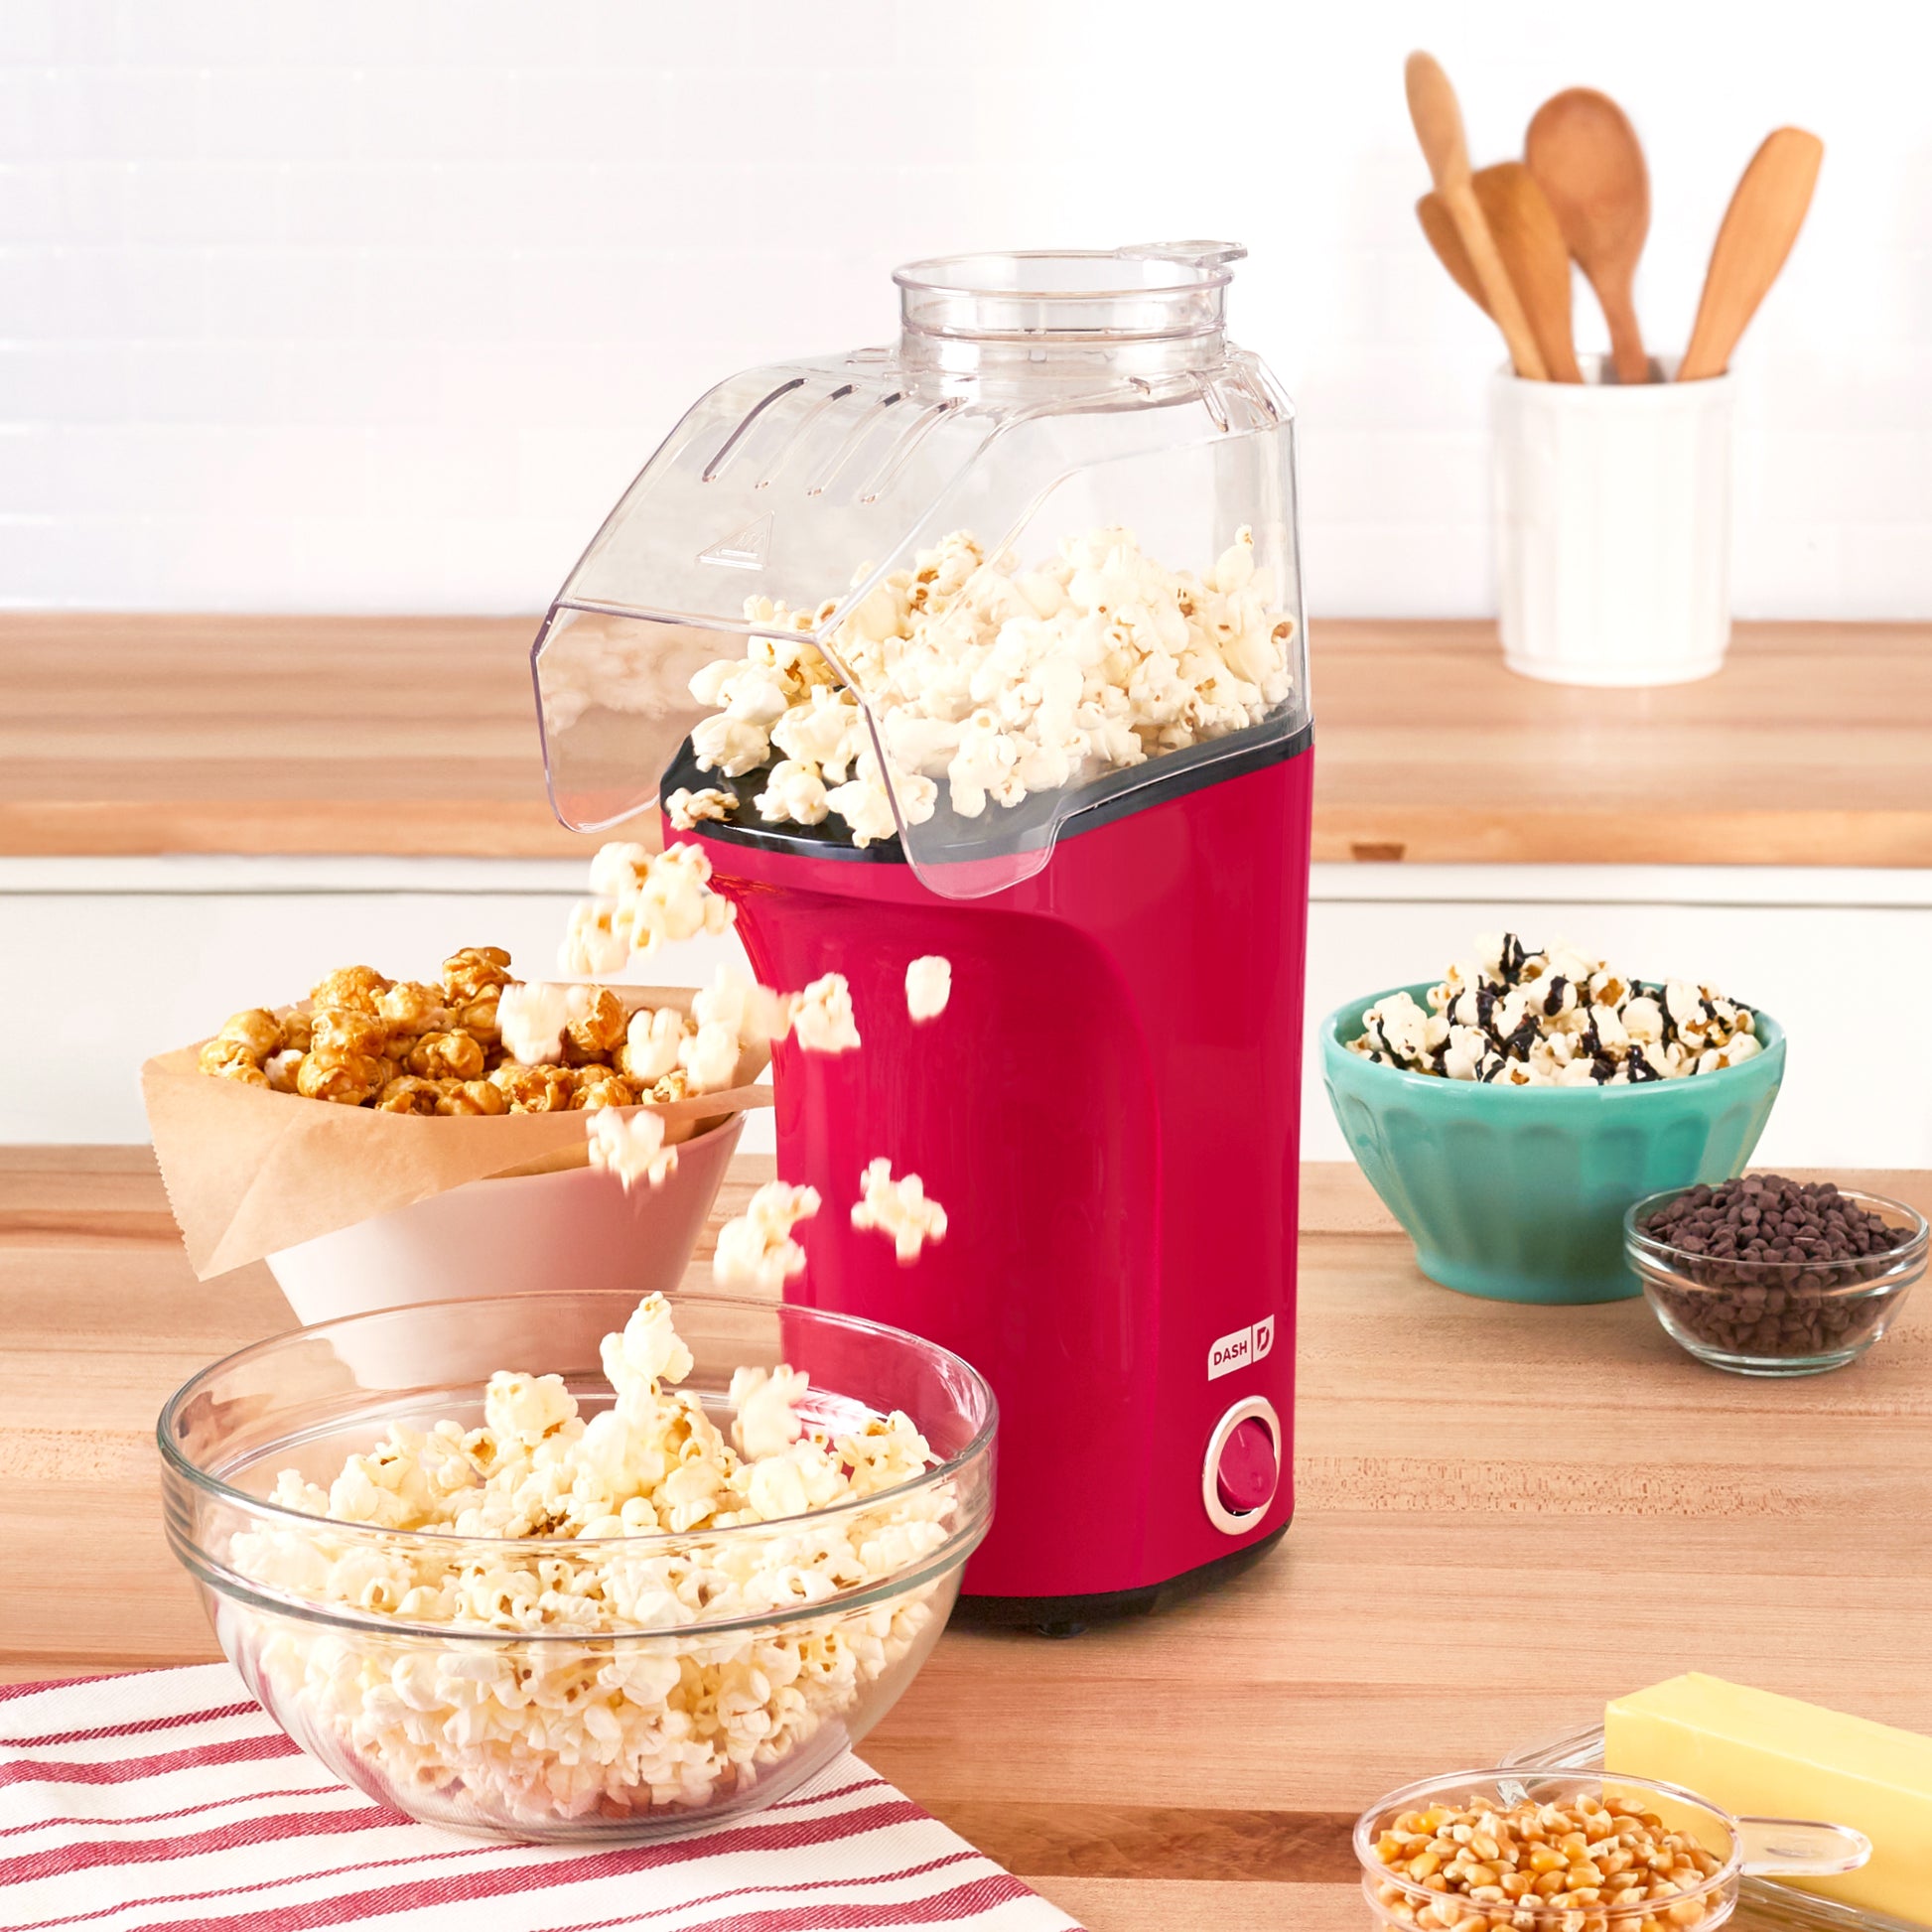 DASH Hot Air Popcorn Popper Maker with Measuring Cup to Portion Popping  Corn Kernels + Melt Butter, 16 Cups - White